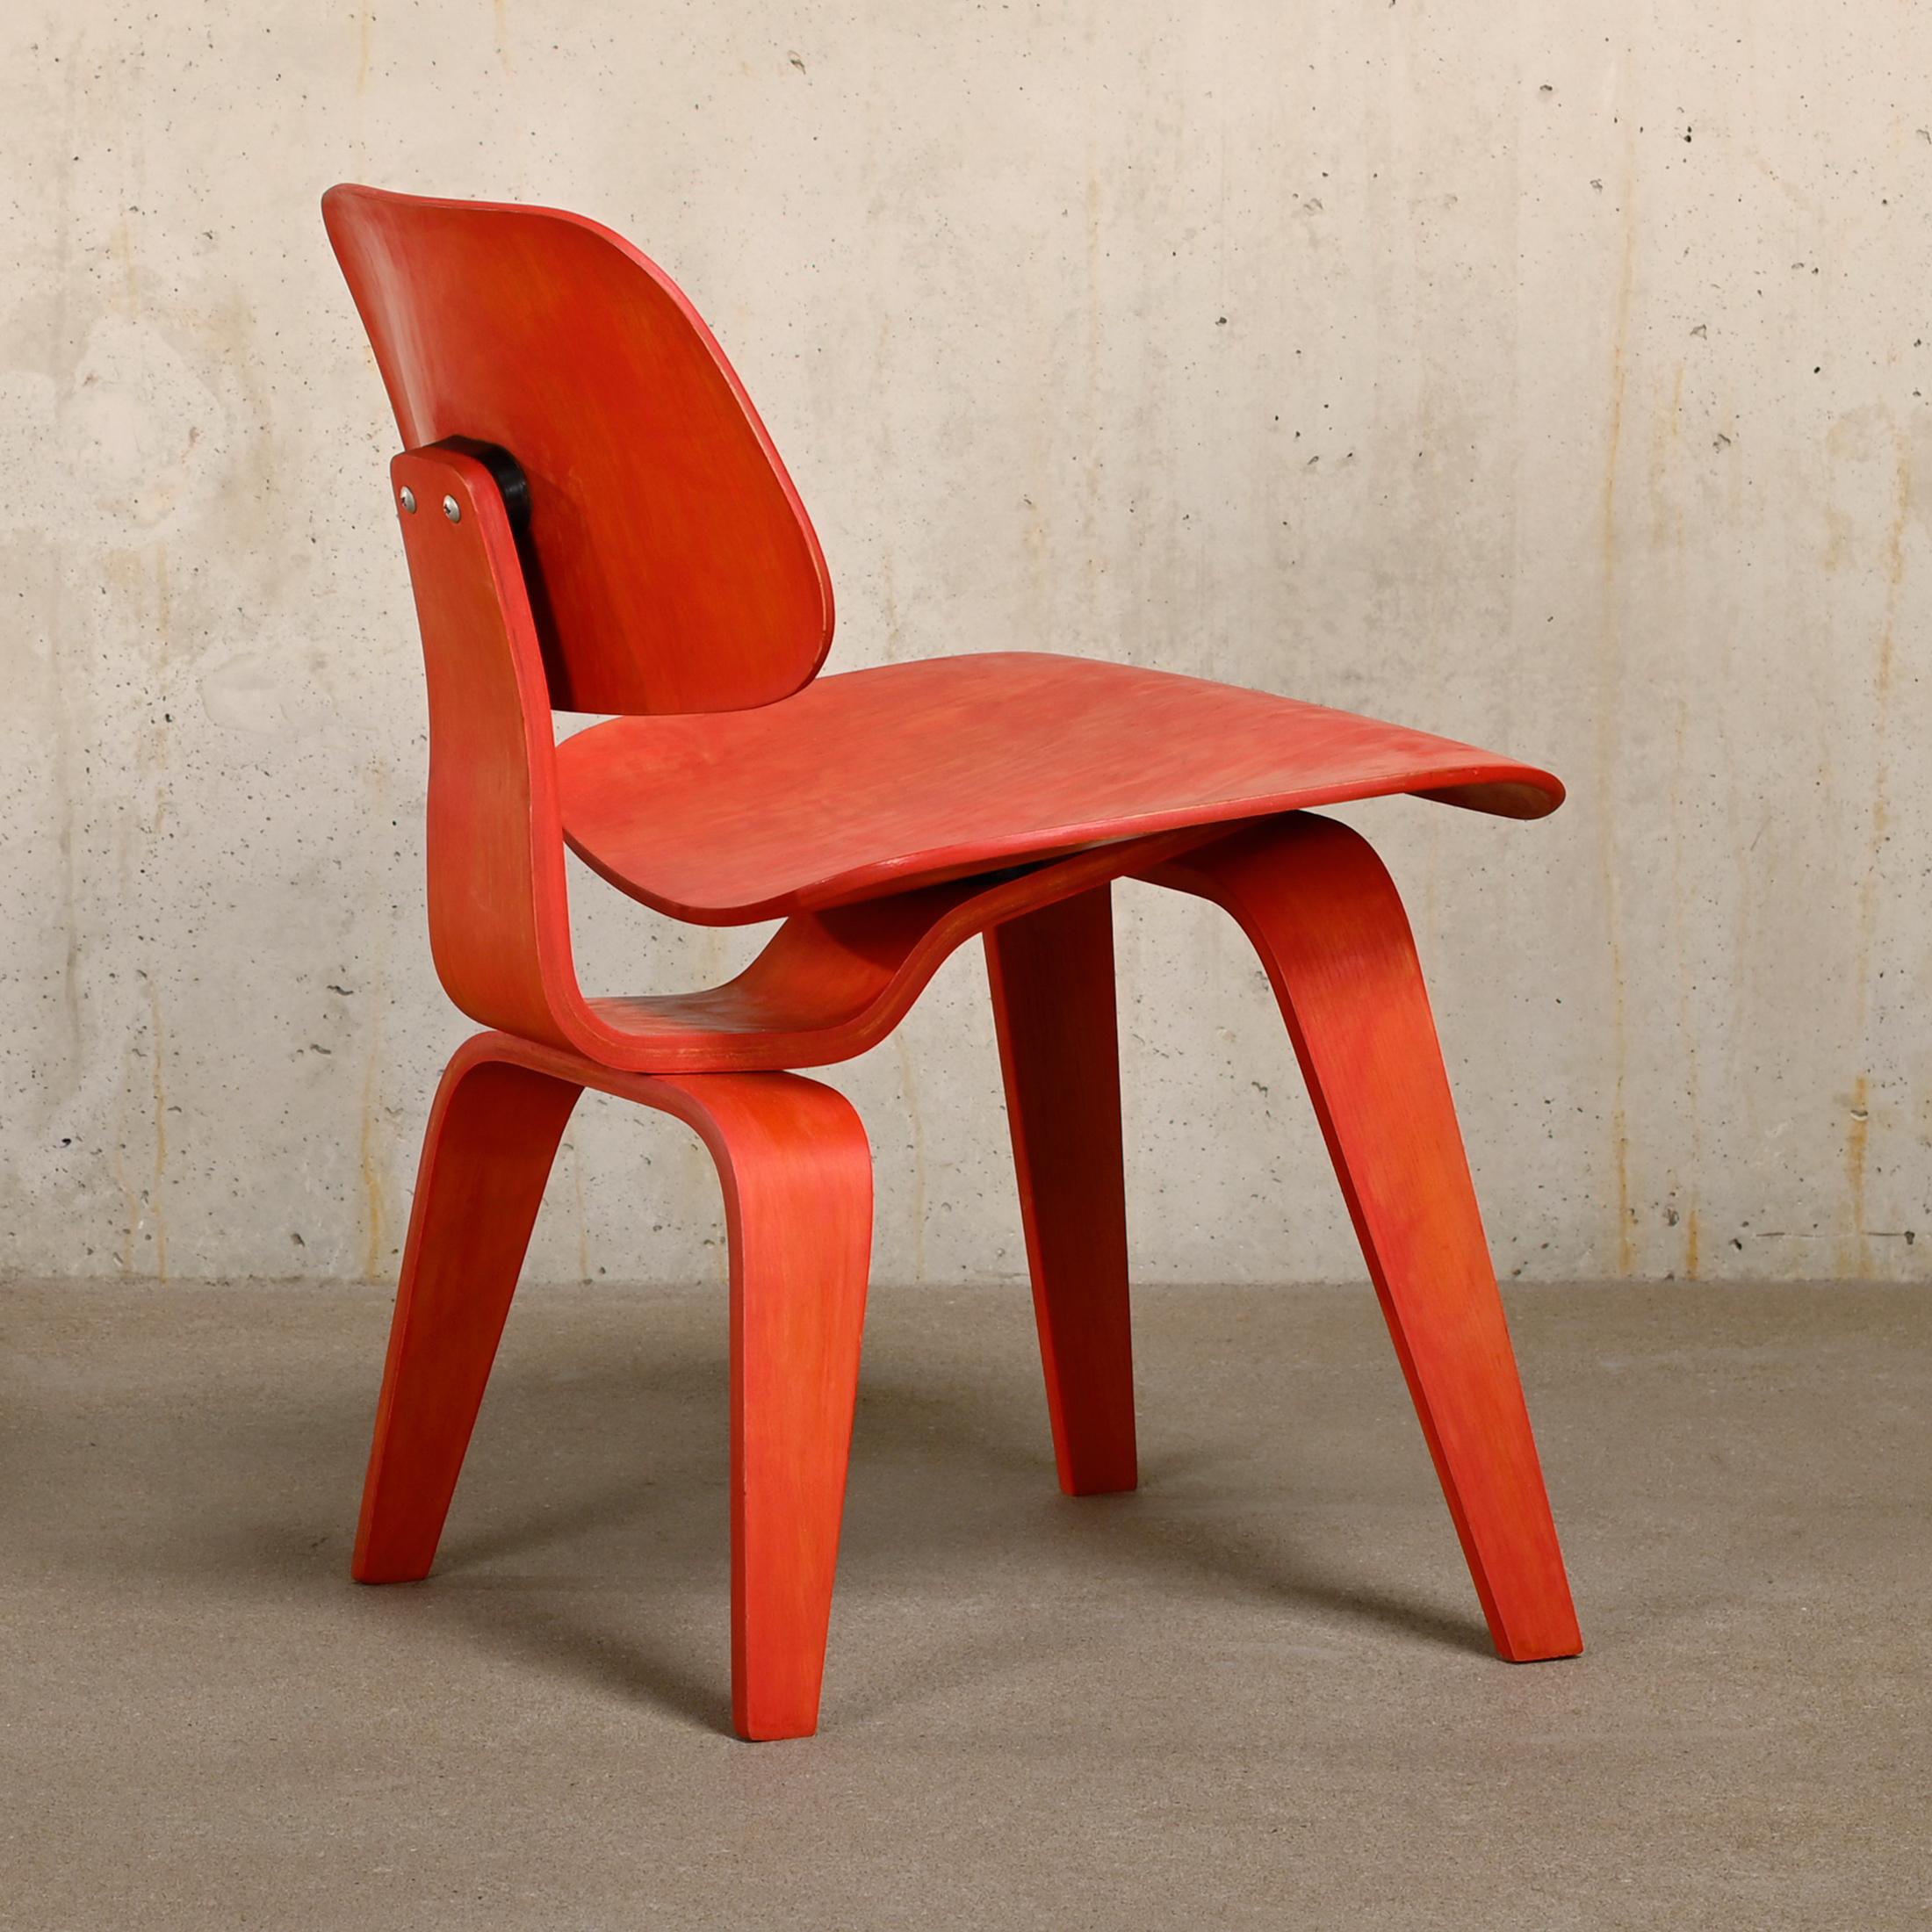 American Charles & Ray Eames Early DCW Red aniline dye Ash Dining Chair for Evans Plywood